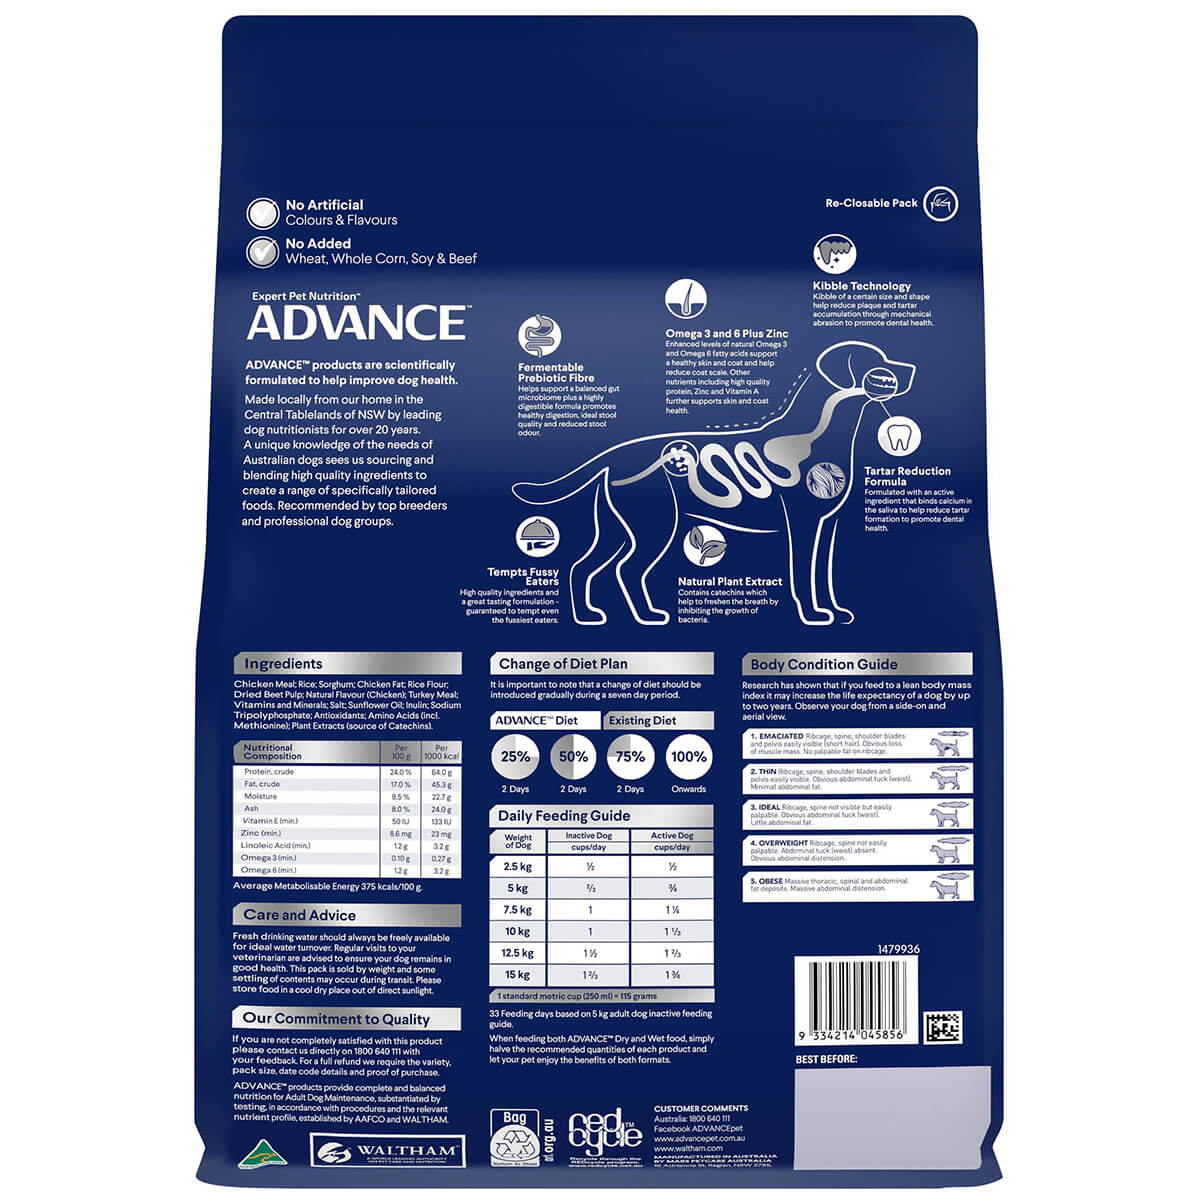 Advance Dental Care Toy & Small Breed Adult Dry Dog Food 2.5kg